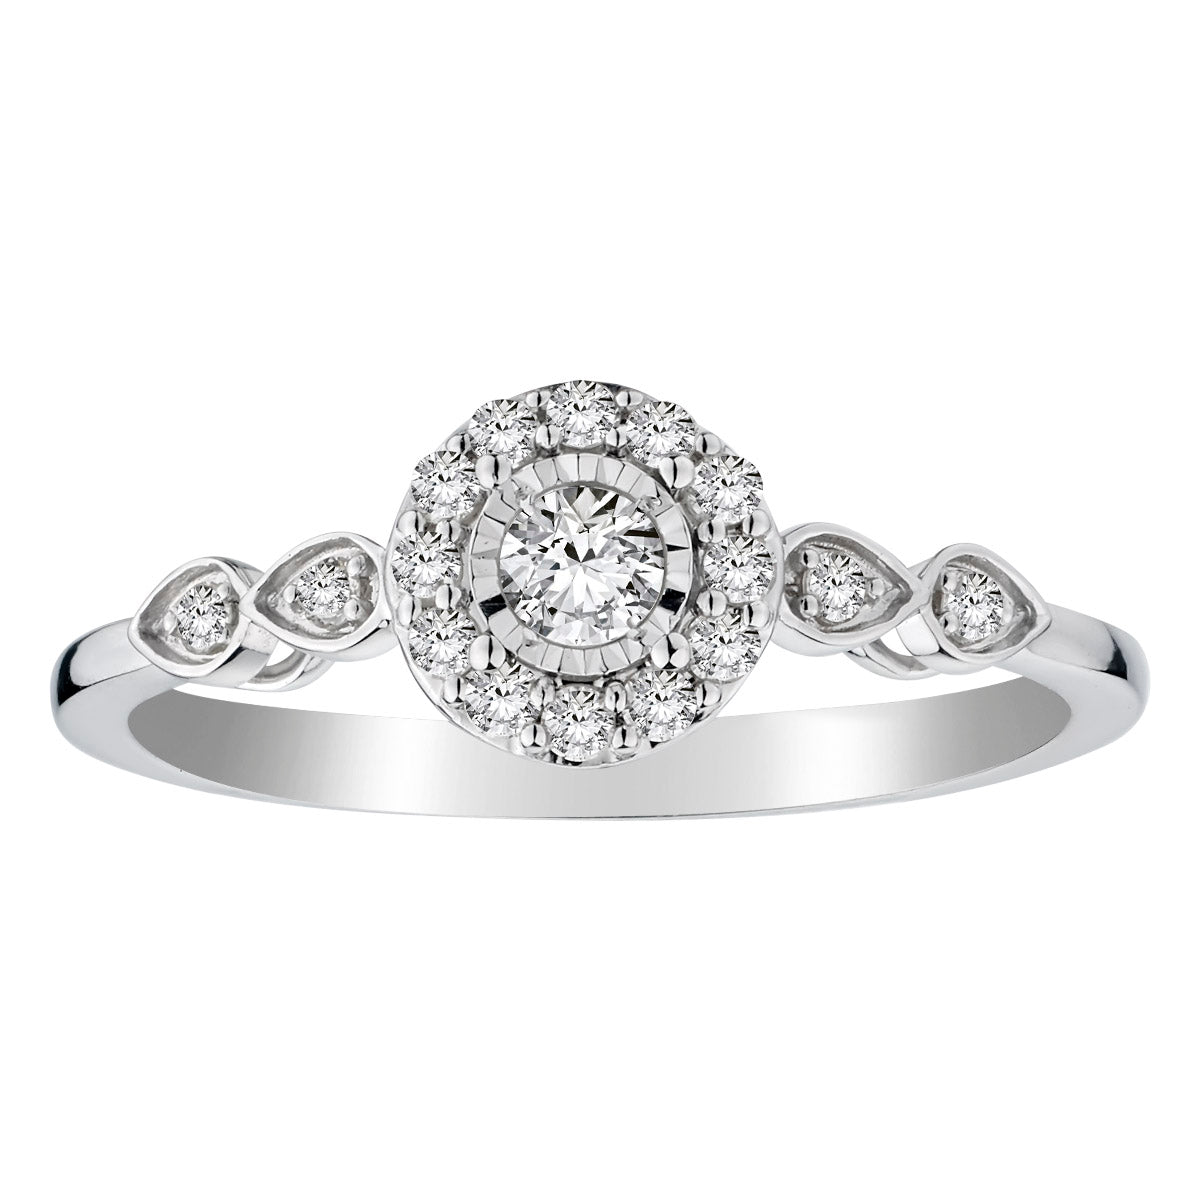 .26 Carat of Diamonds Halo Ring, 10kt White Gold......................NOW